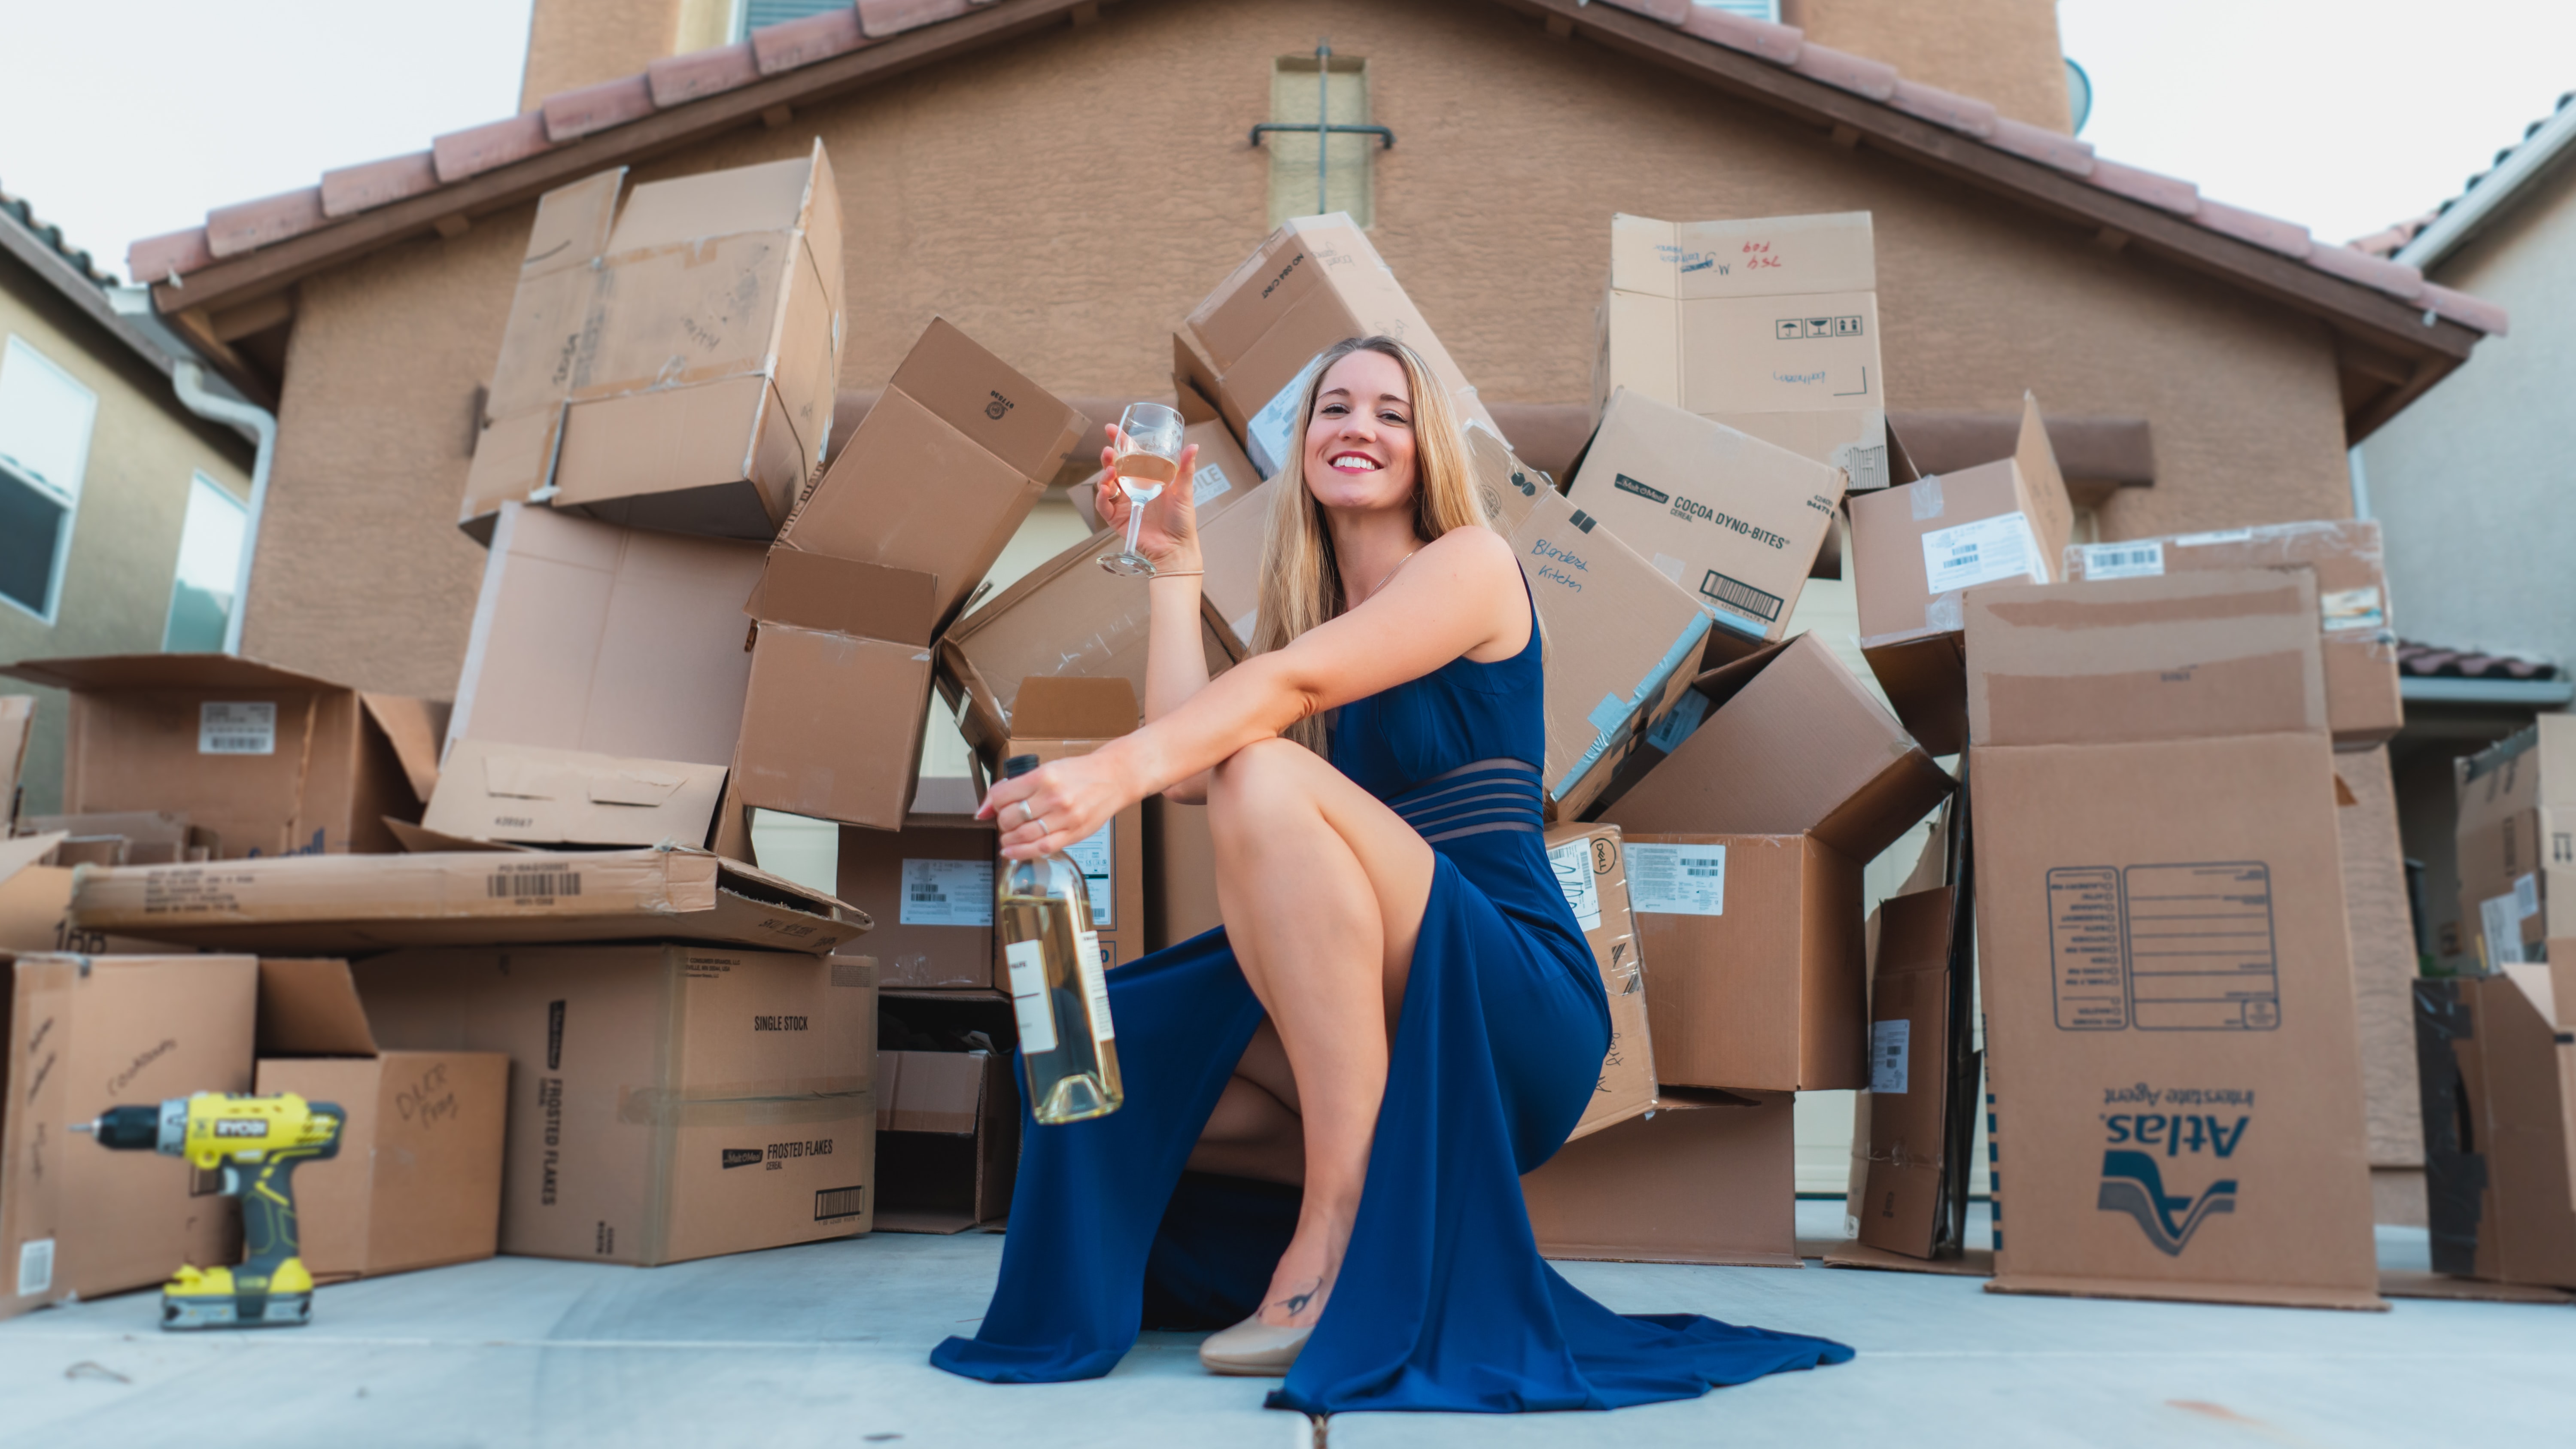 : A girl in an elegant blue dress standing in front of the boxes holding a bottle and a glass of wine